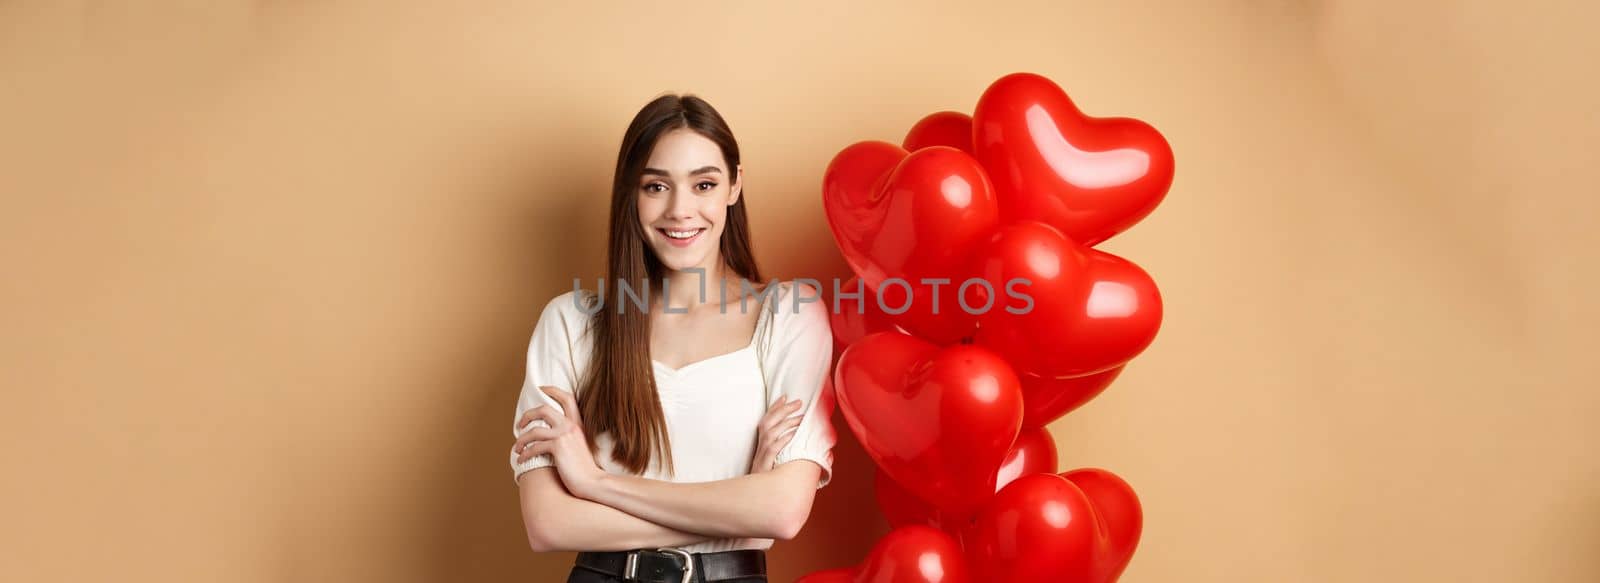 Cheerful young woman looking happy on Valentines day, standing near hearts balloons with arms crossed, smiling at camera, standing on beige background.